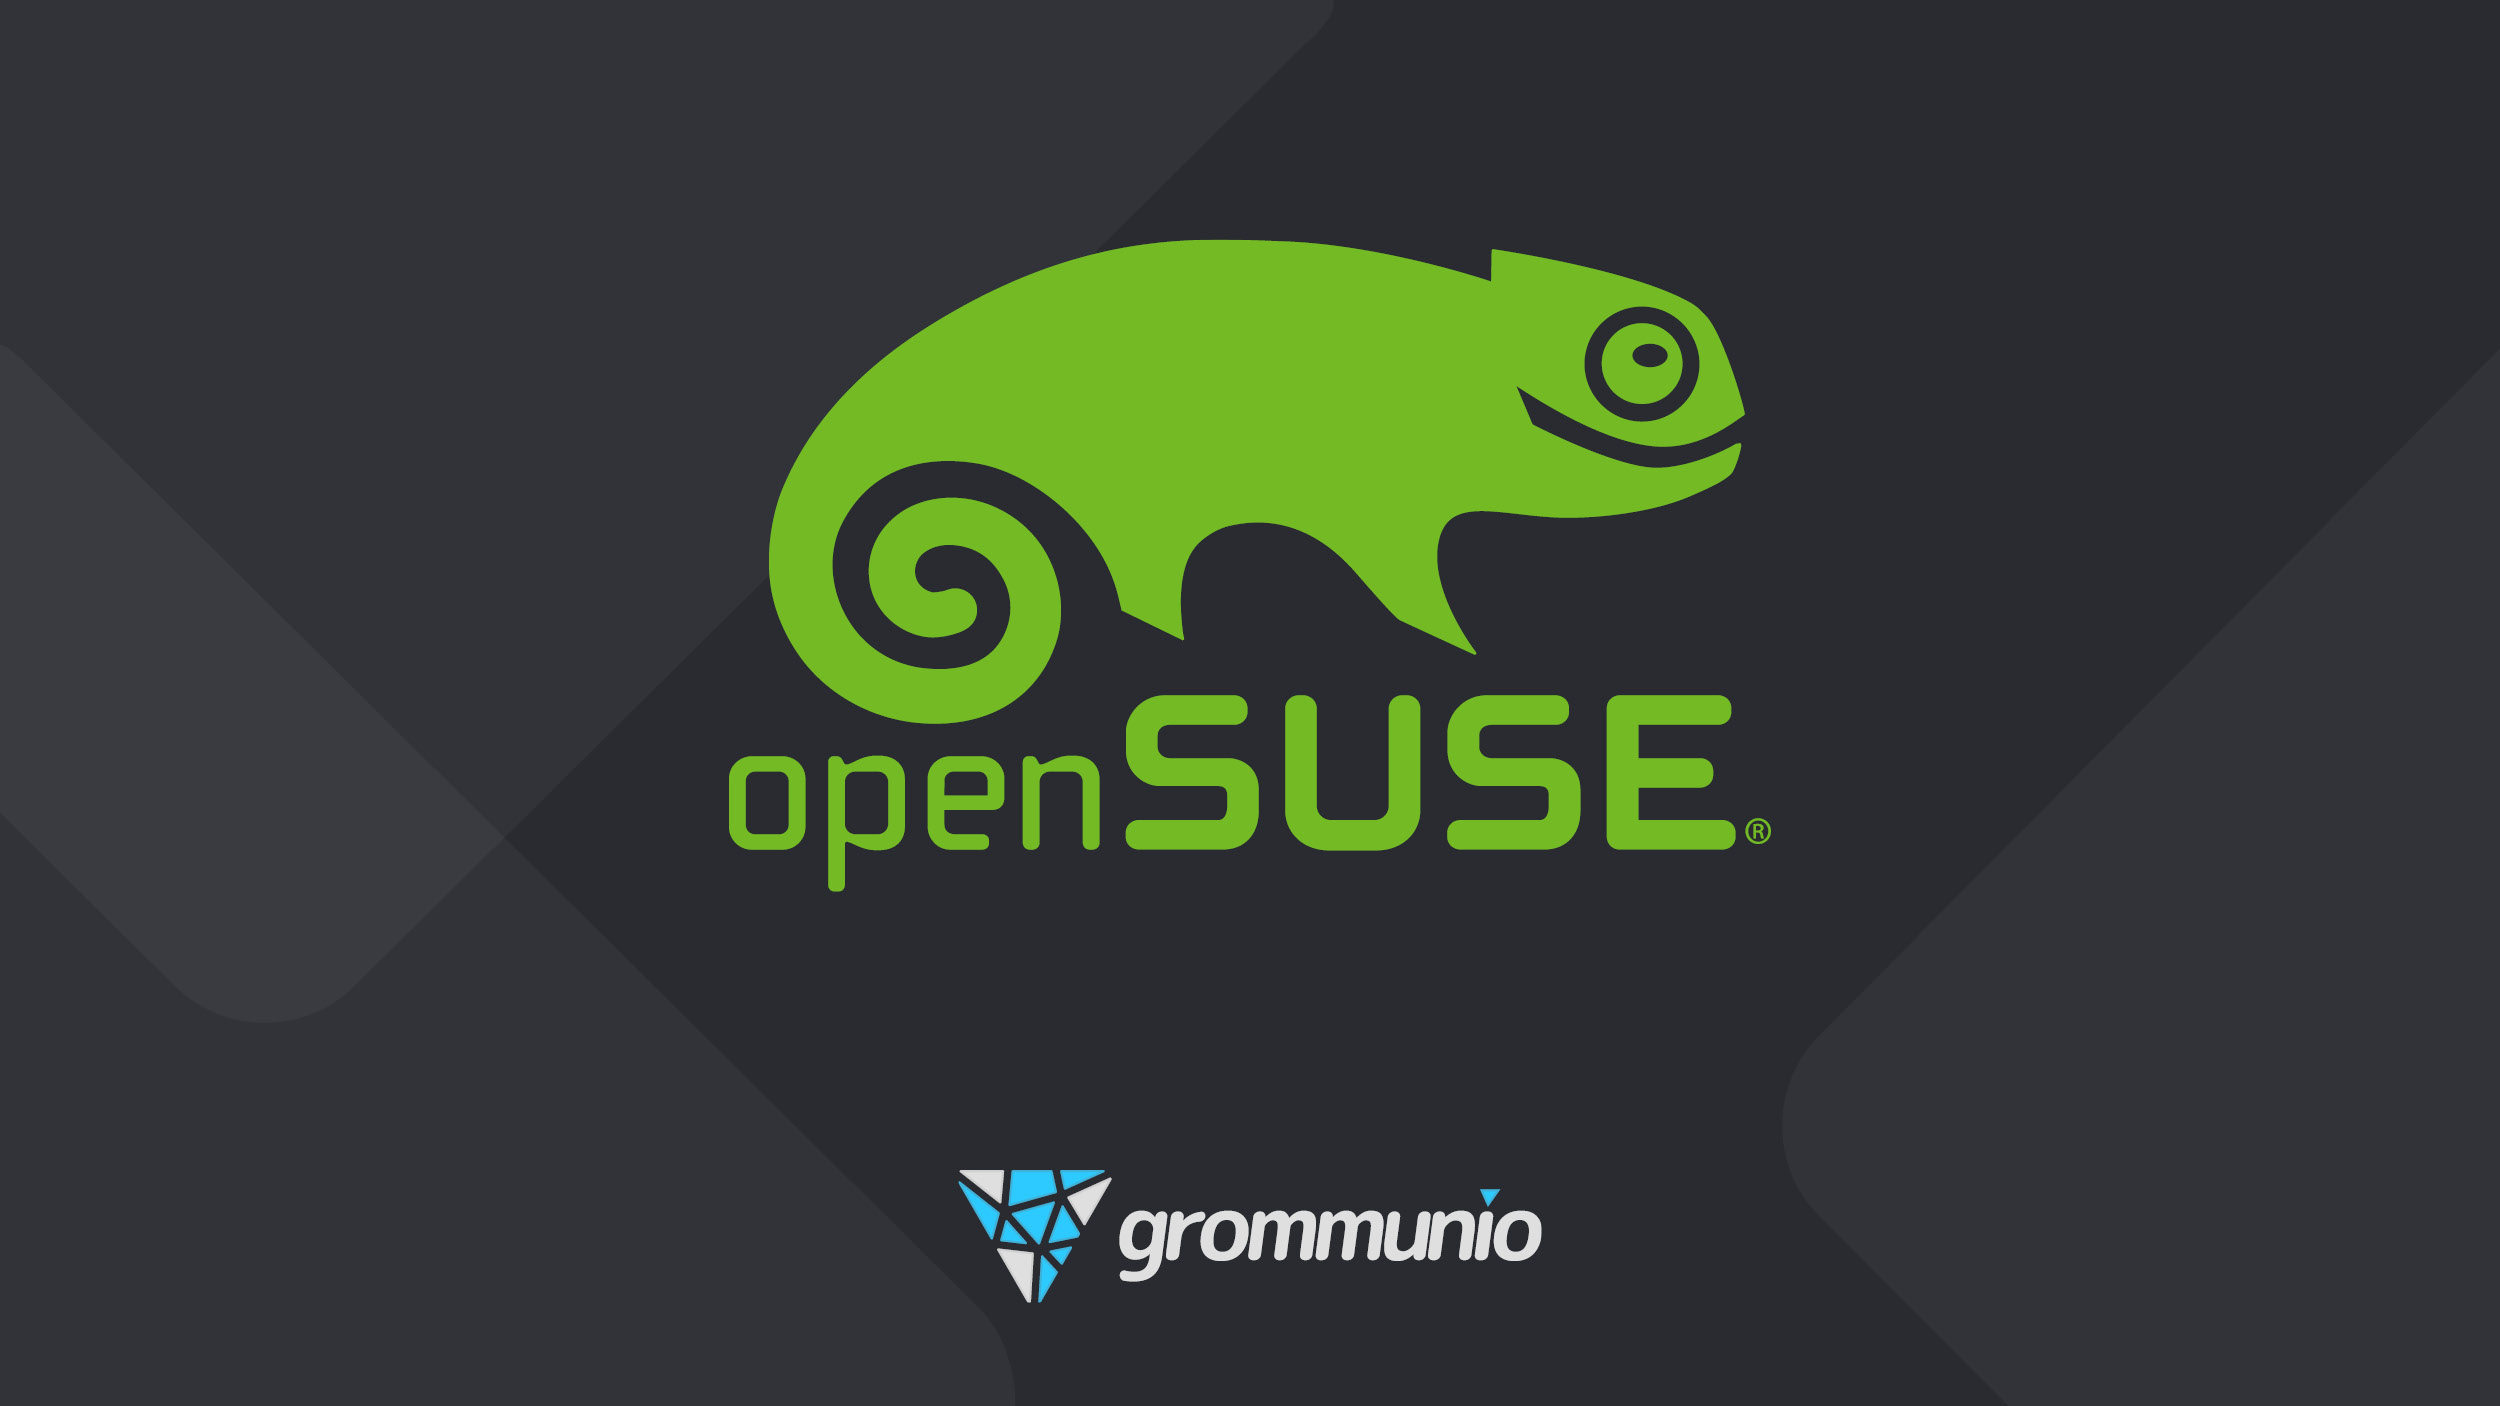 grommunio packages now also in openSUSE Factory, grommunio at SUSECON